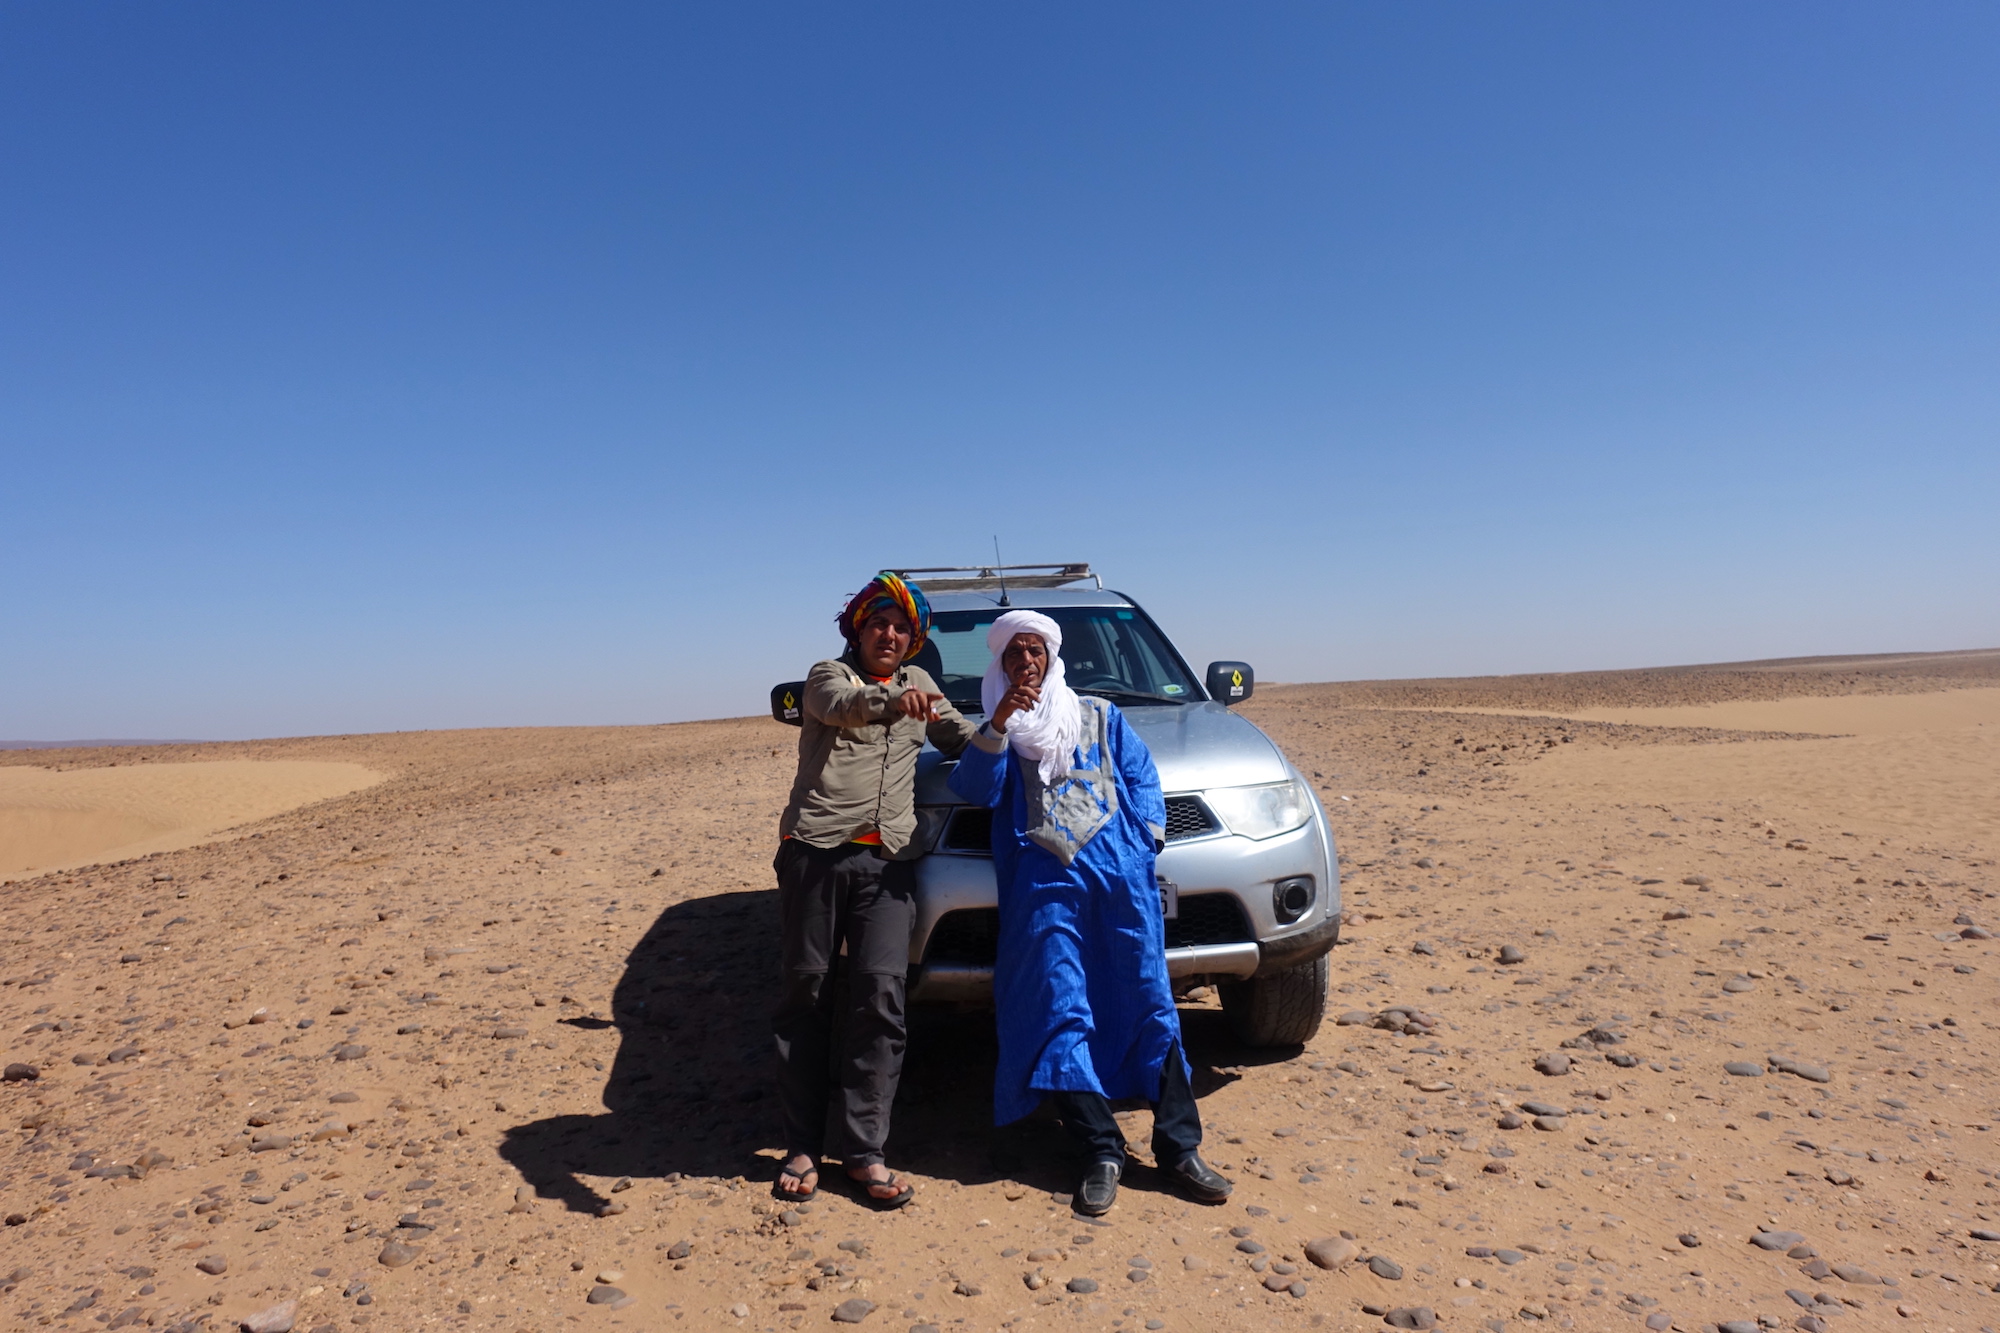 My Sahara desert tour guide and the 4x4 driver on the way to the Erg Chigaga desert camp in Morocco